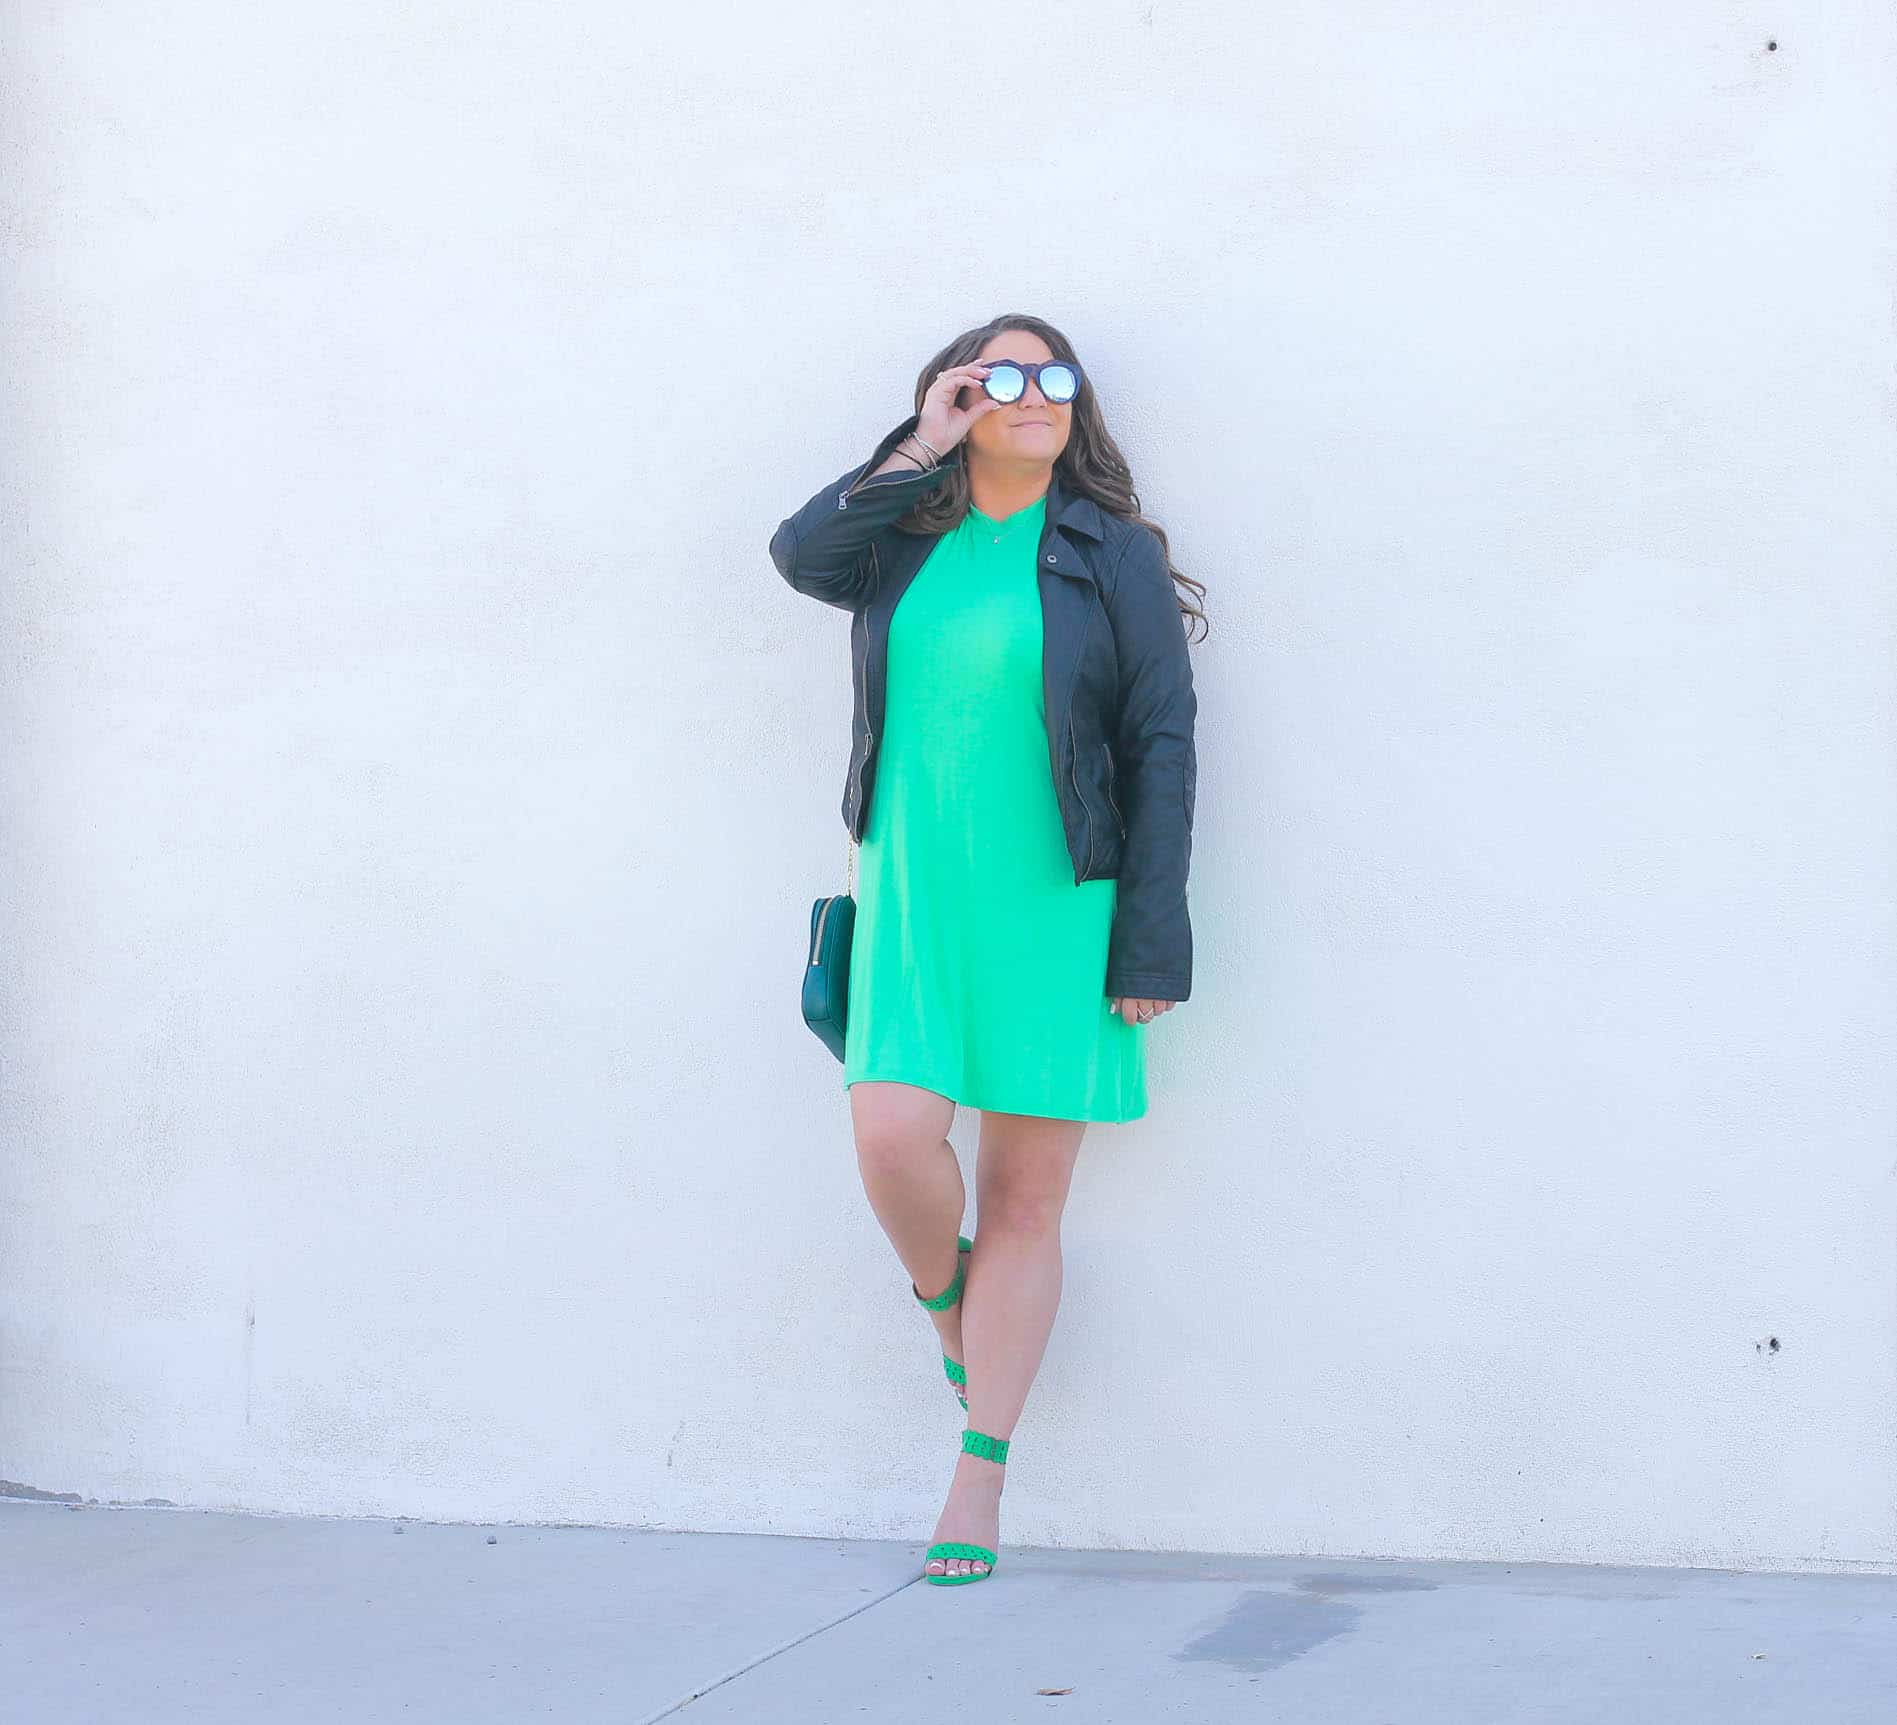 la blogger, style blogger, fashion blogger, missyonmadison, missyonmadison blog, missyonmadison instagram, melissa tierney, st patricks day, st patricks day 2018, green dress, what to wear for st patricks day, green look, bloglovin, green heels, green handbag, green outfit, moto jacket, faux leather moto jacket,